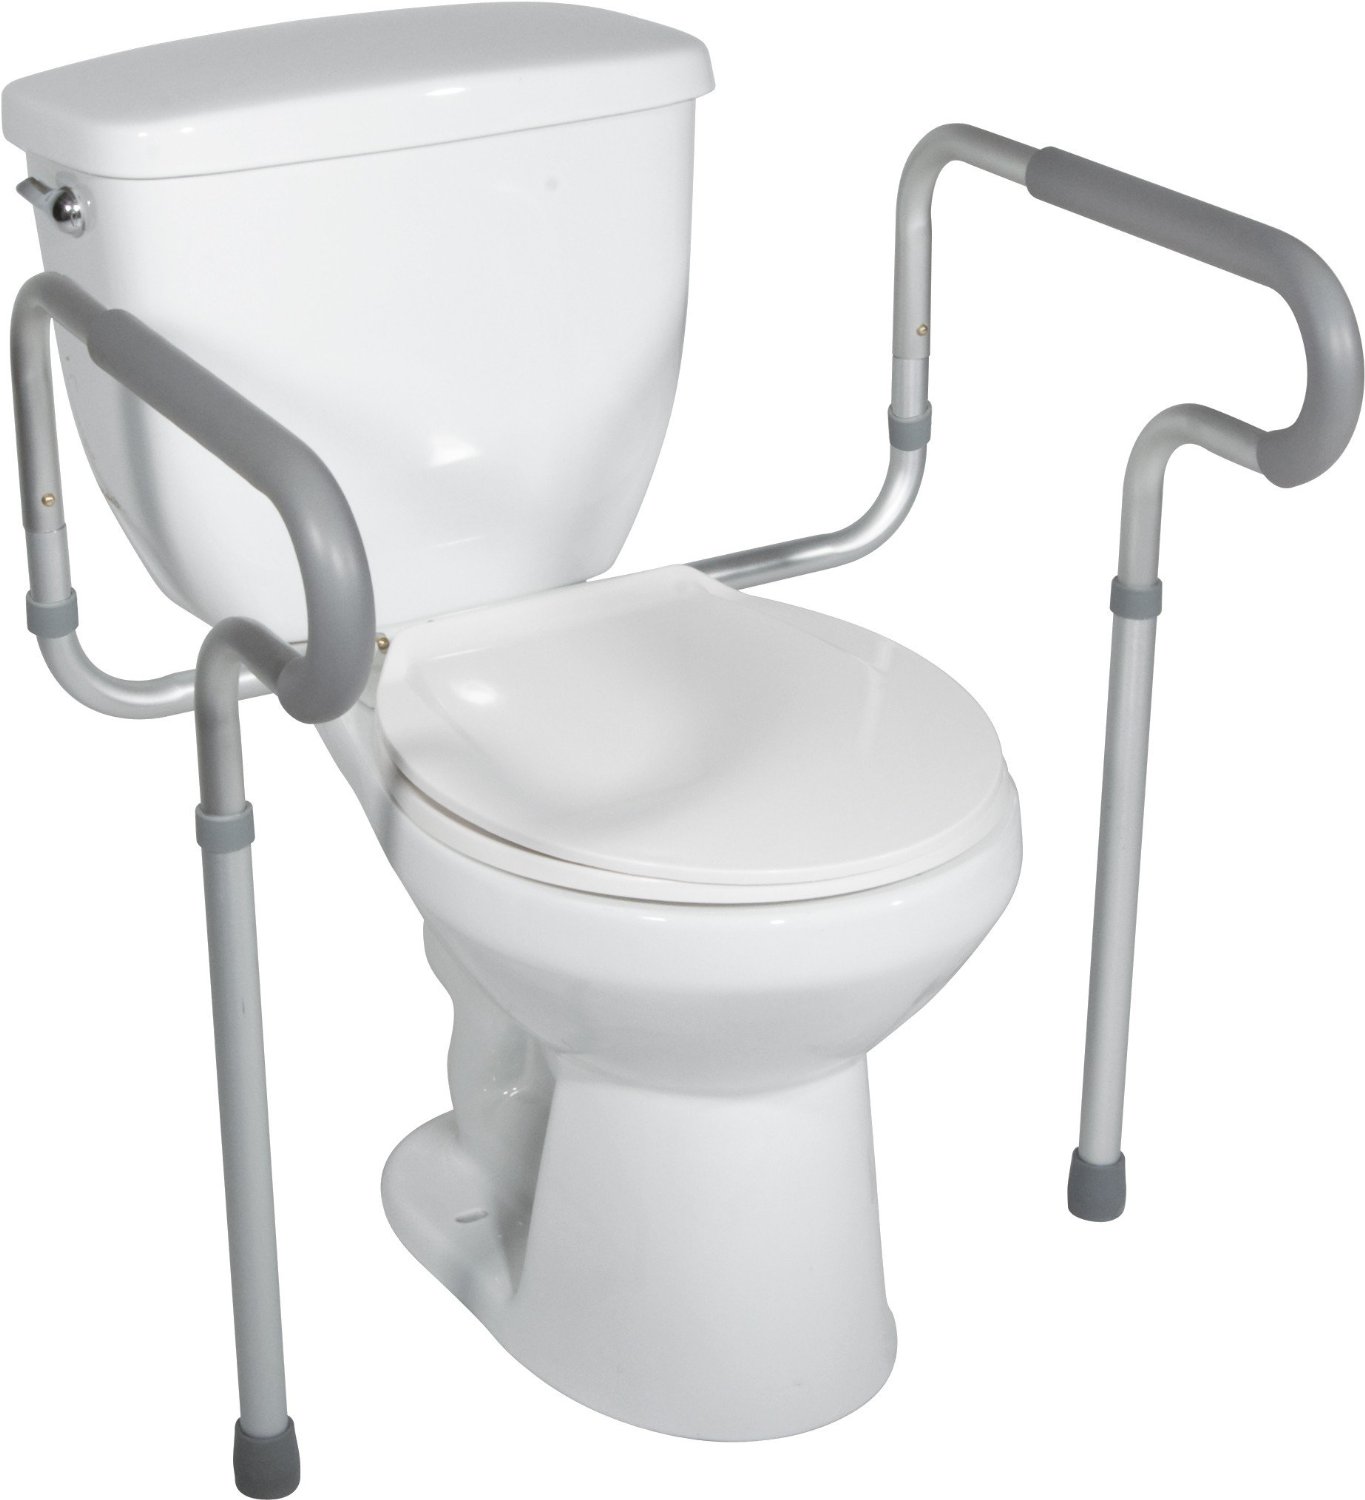 Secure Adjustable Toilet Safety Support Rail